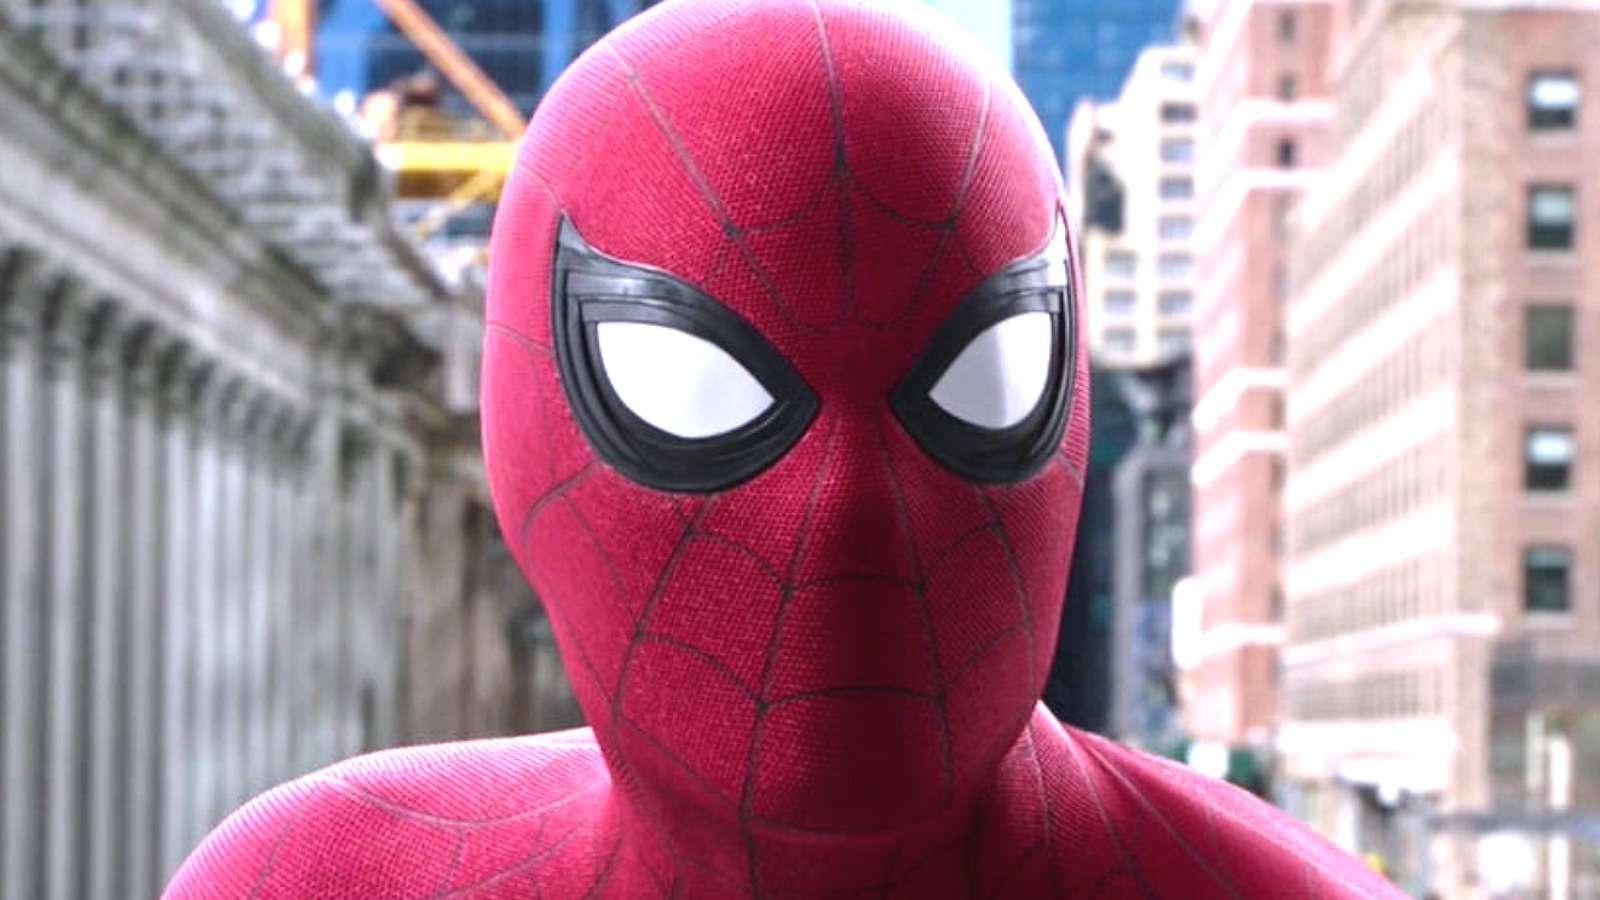 Spider-Man 4 - What We Know So Far